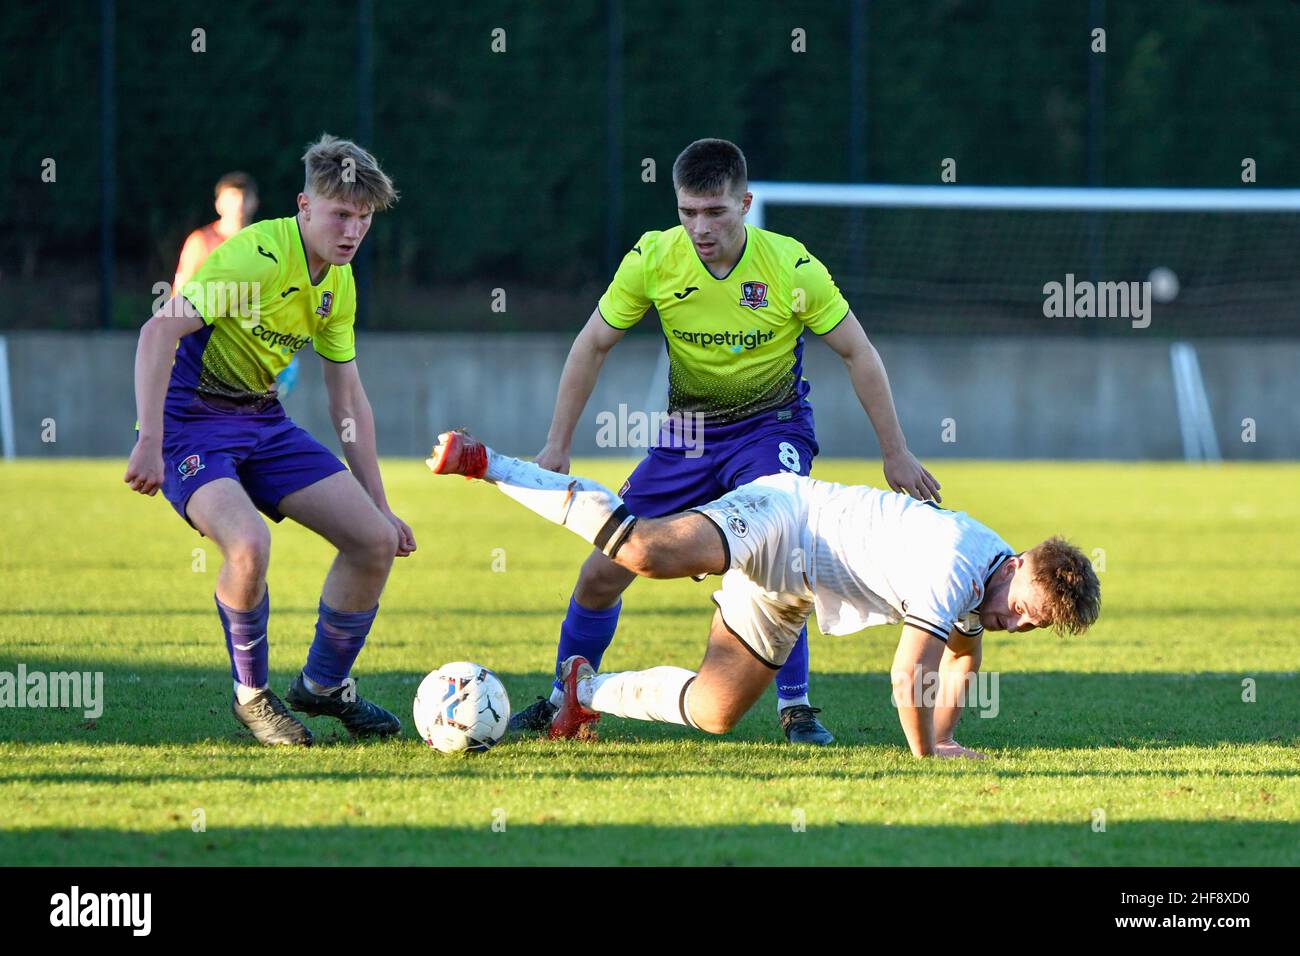 Swansea, Wales. 14 January, 2022. Action during the Premier League Cup game between Swansea City Under 23s and Exeter City Under 23s at the Swansea City Academy in Swansea, Wales, UK on 14 January 2022. Credit: Duncan Thomas/Majestic Media. Credit: Majestic Media Ltd/Alamy Live News Stock Photo